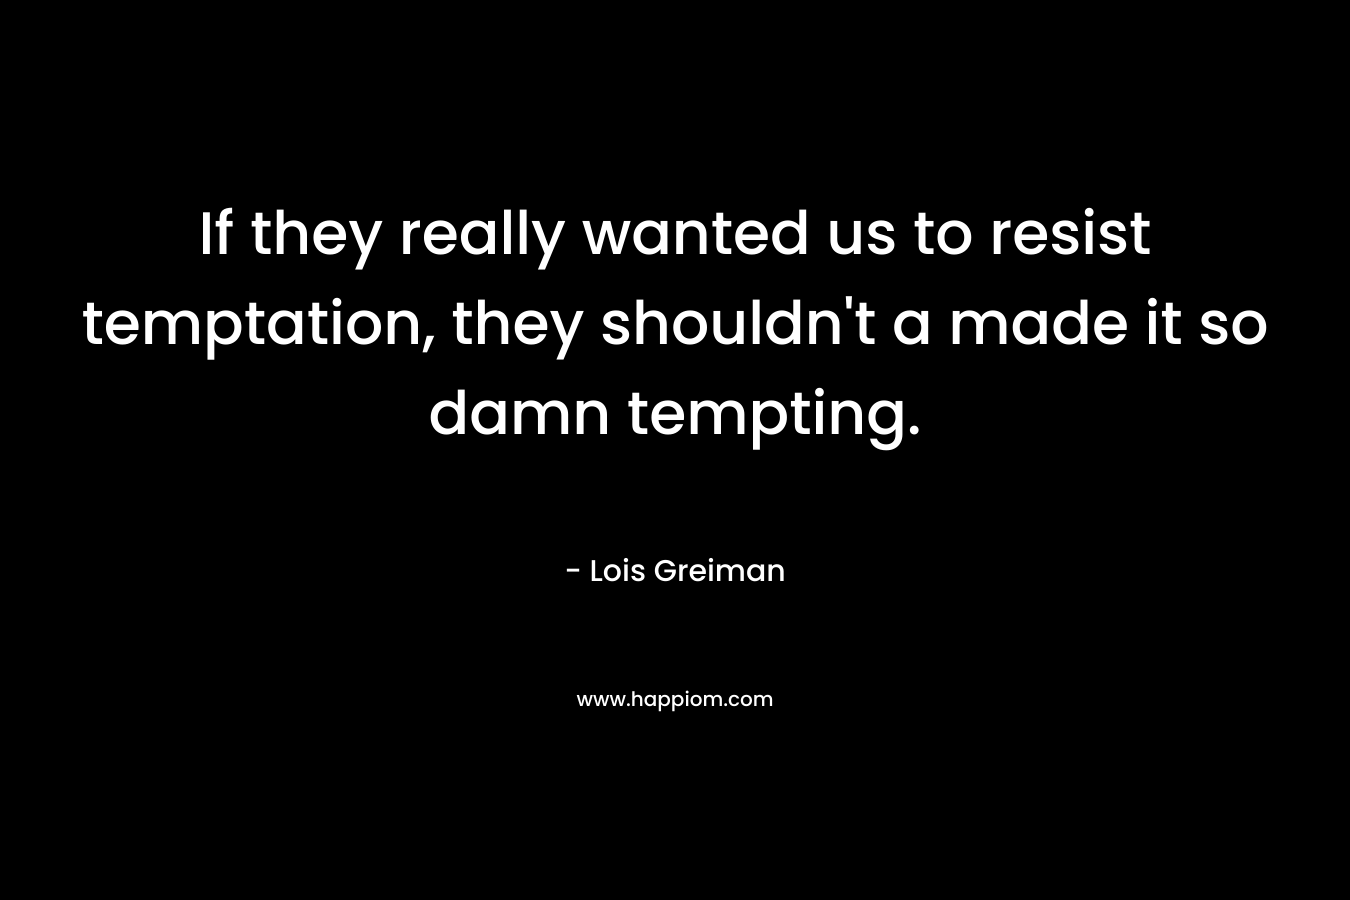 If they really wanted us to resist temptation, they shouldn't a made it so damn tempting.